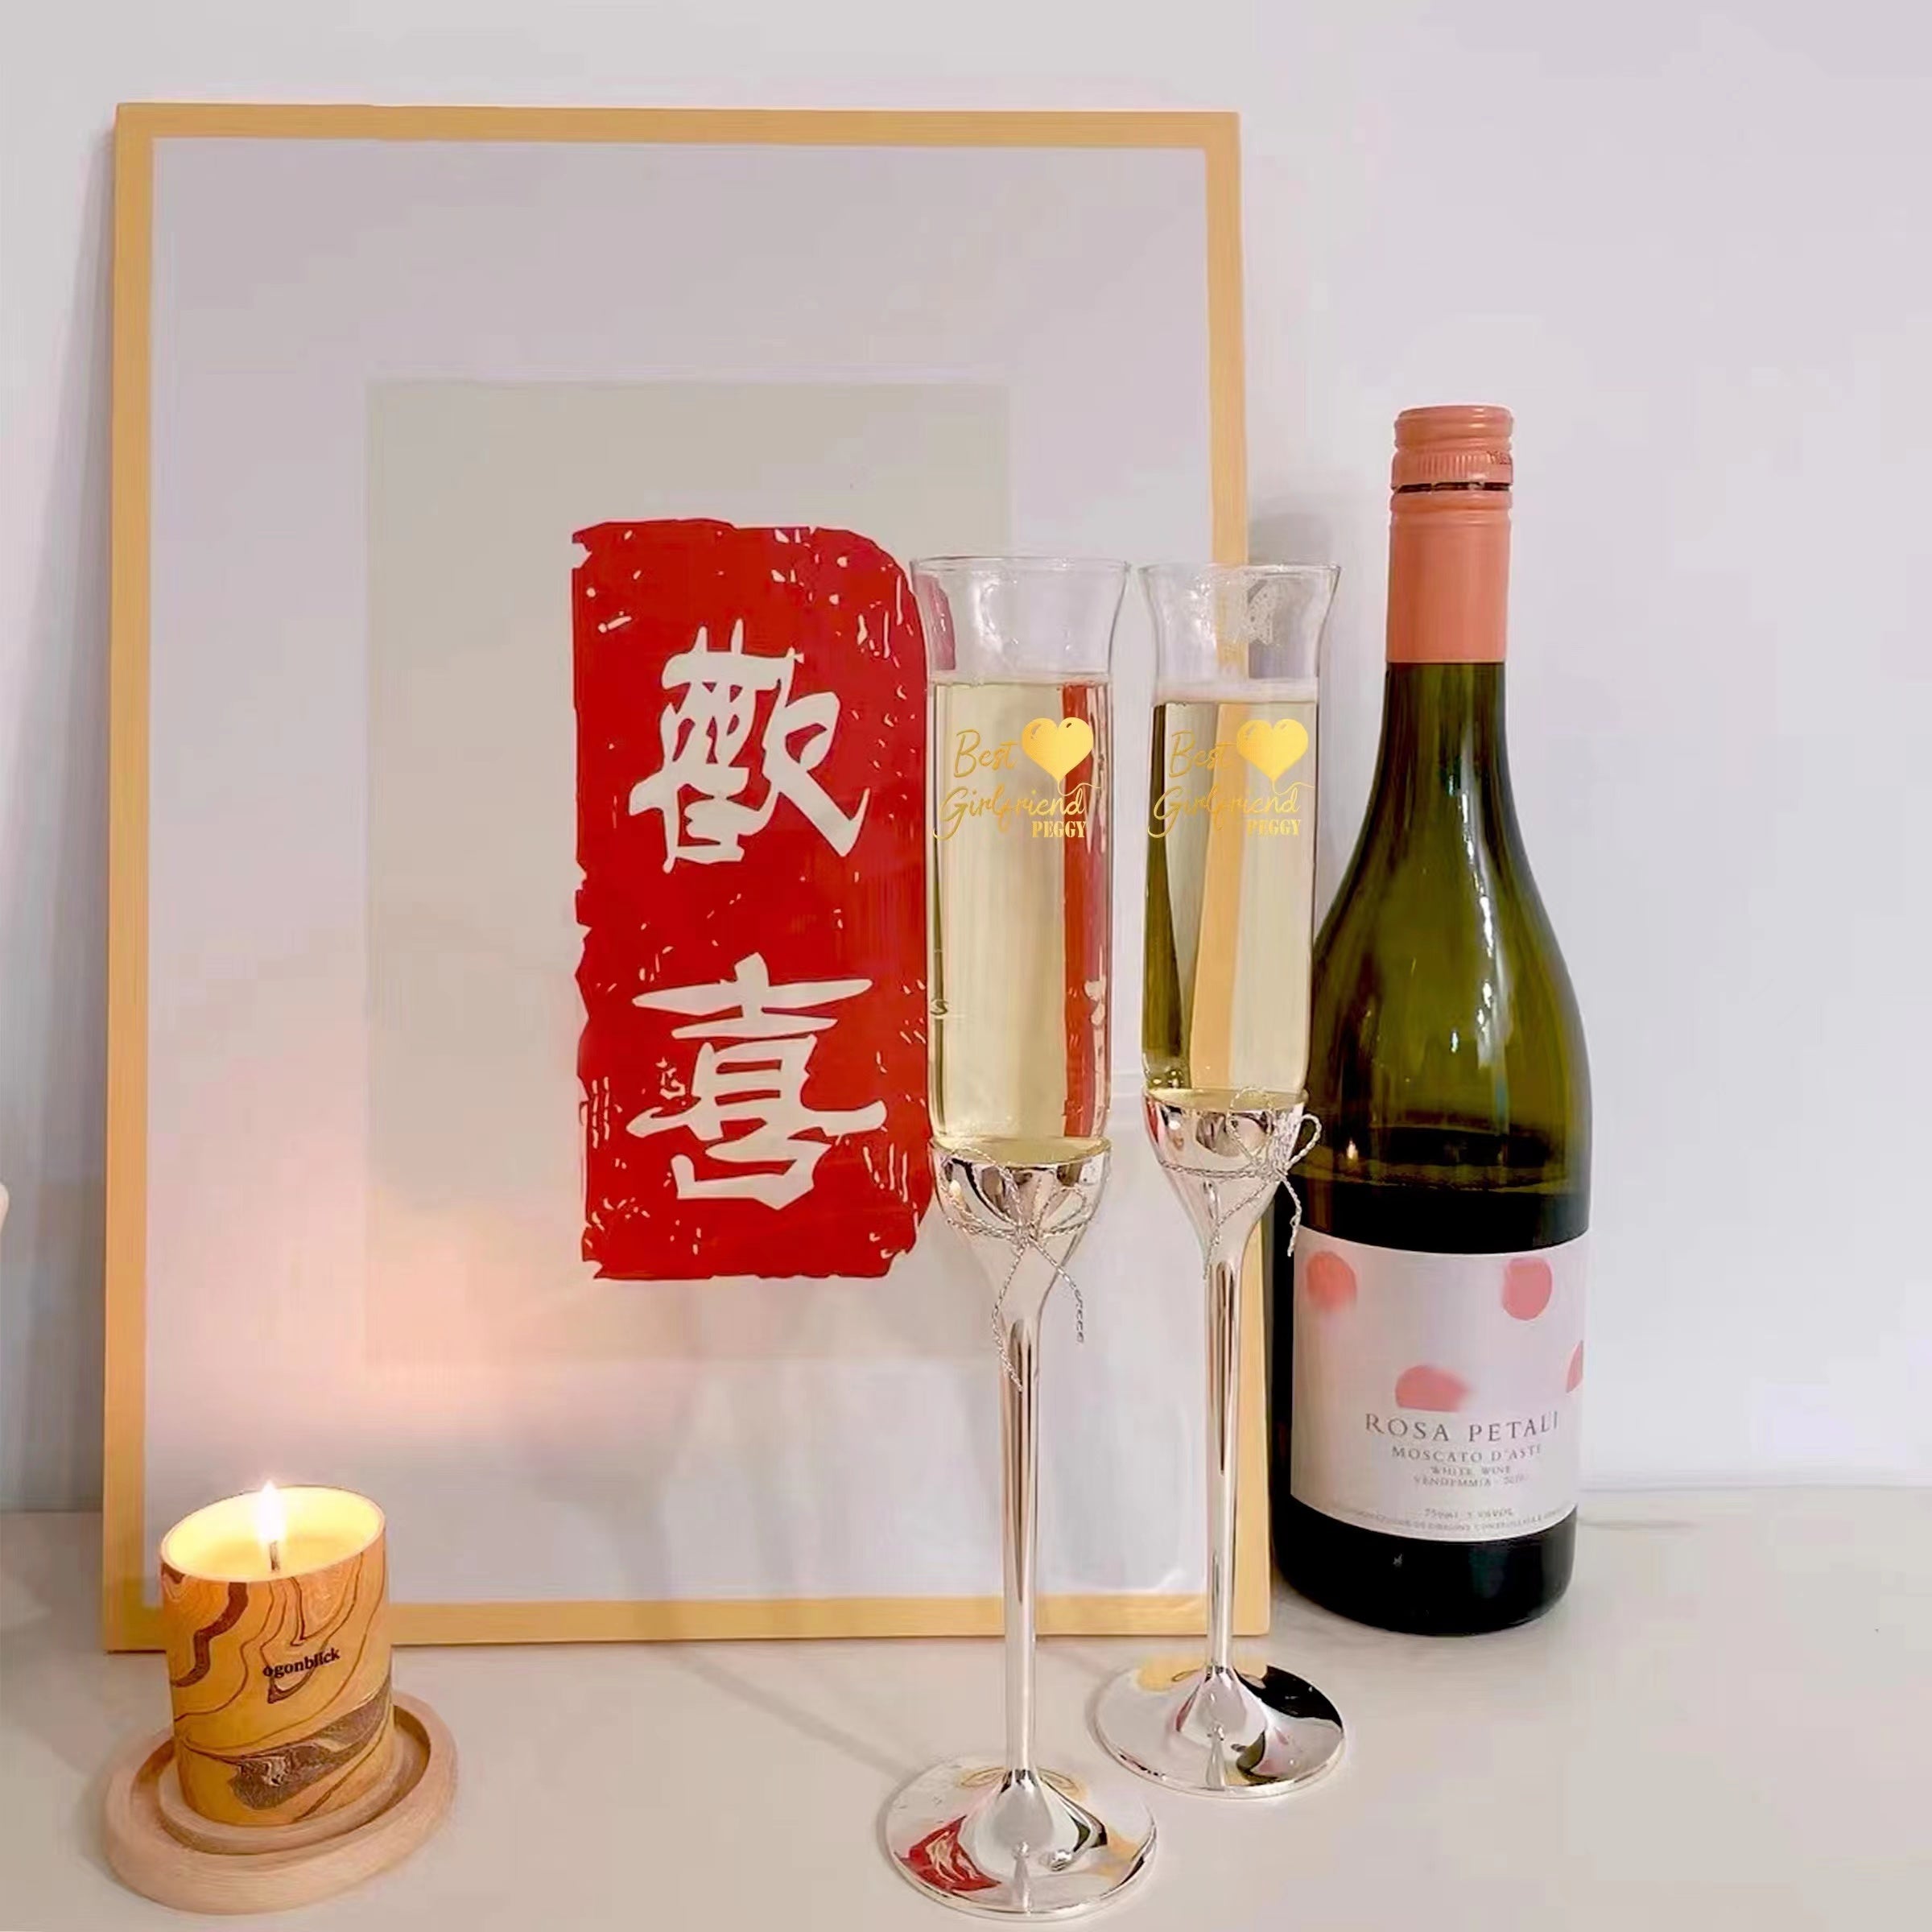 Valentine' s Gift| Vera Wang Love Knots Toasting Flute Pair情人節禮物 送女友 - Design Your Own Wine